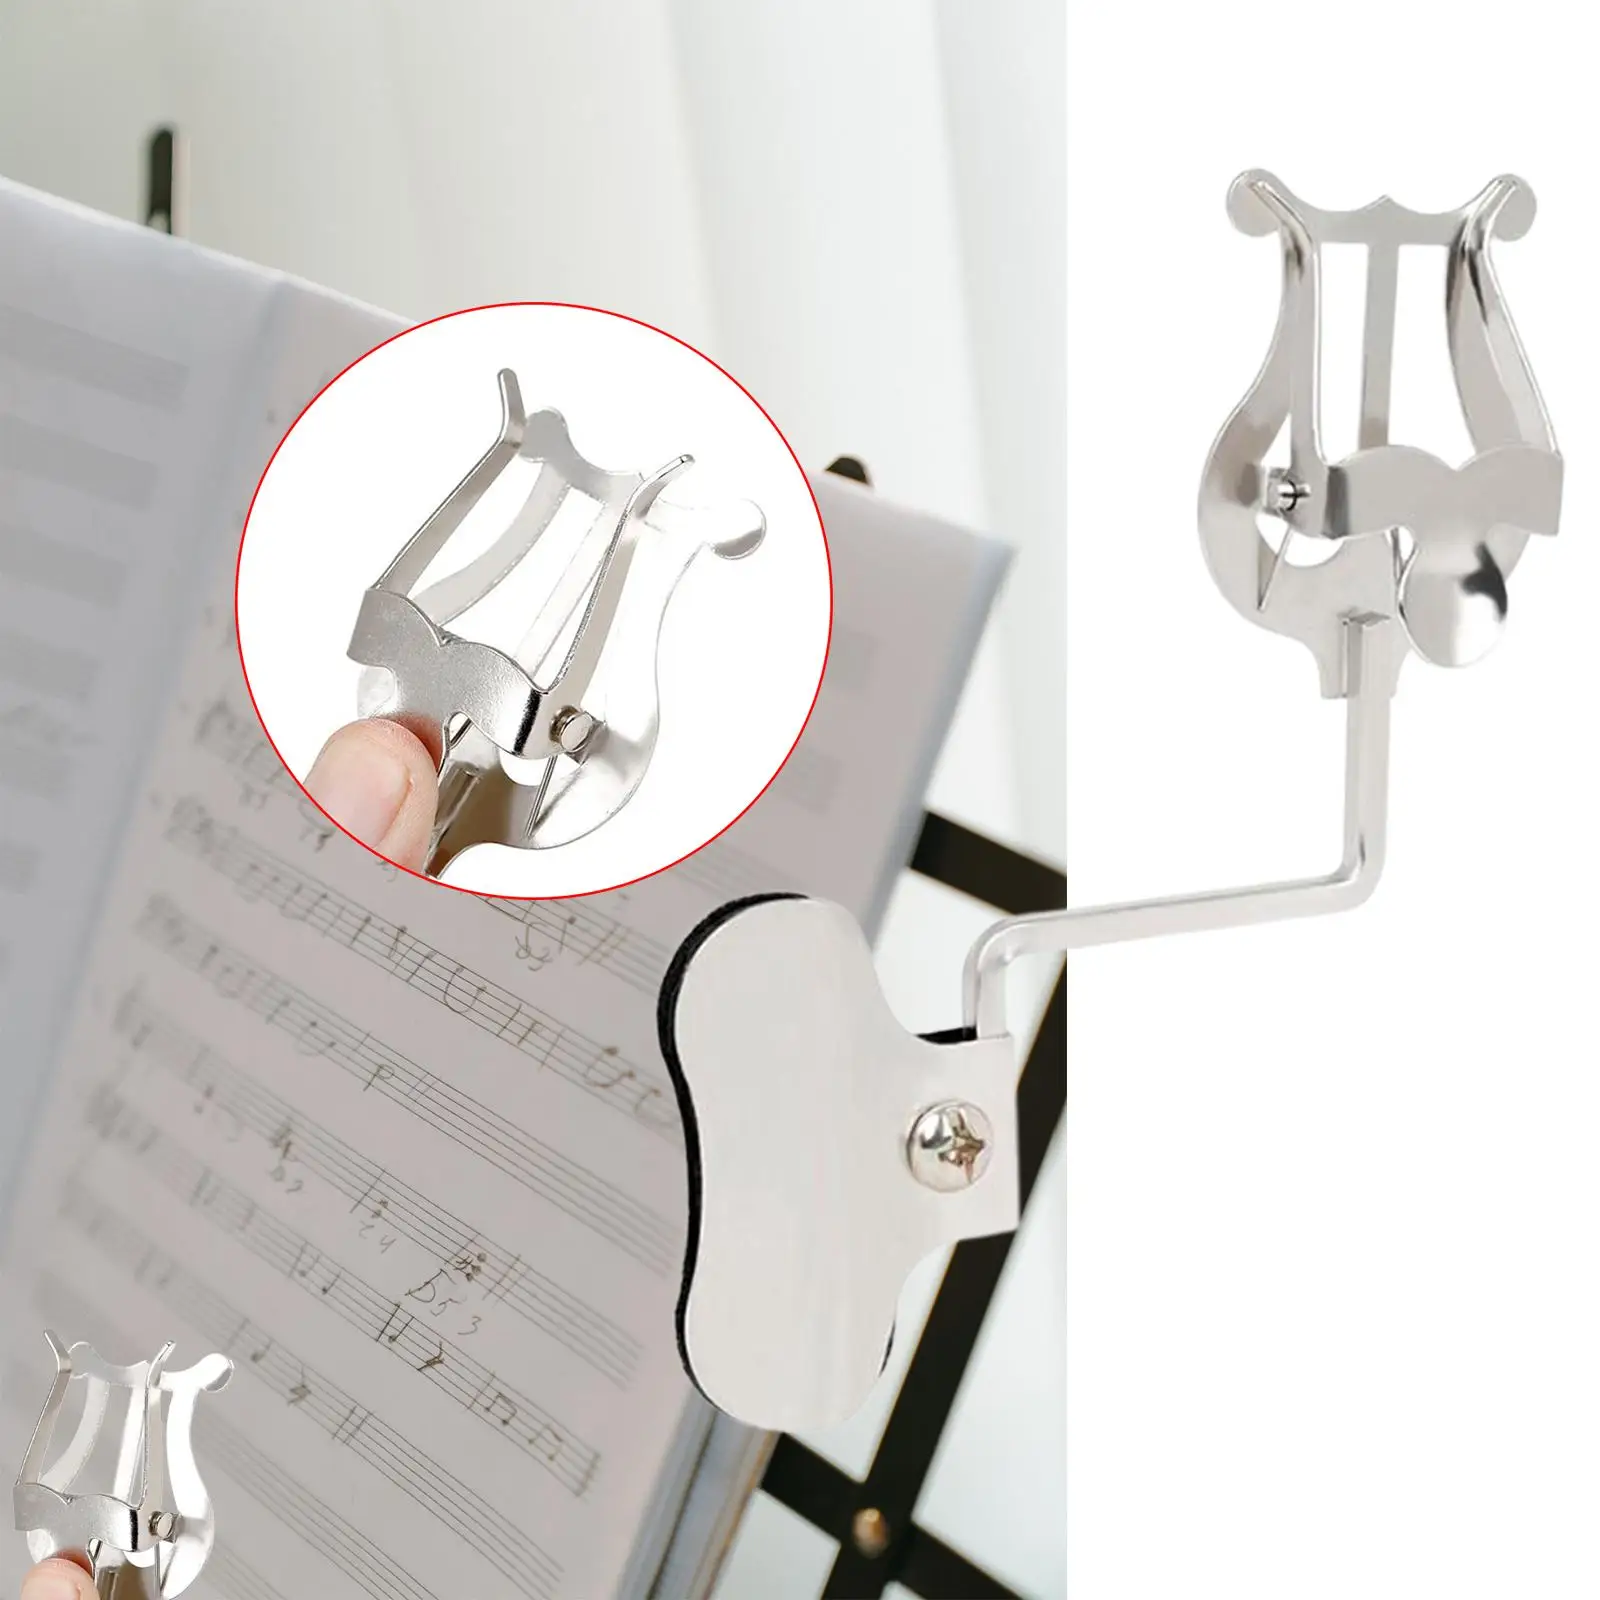 Trombone Music Clip Musical Instrument Accessory for Wind Instruments Trumpet